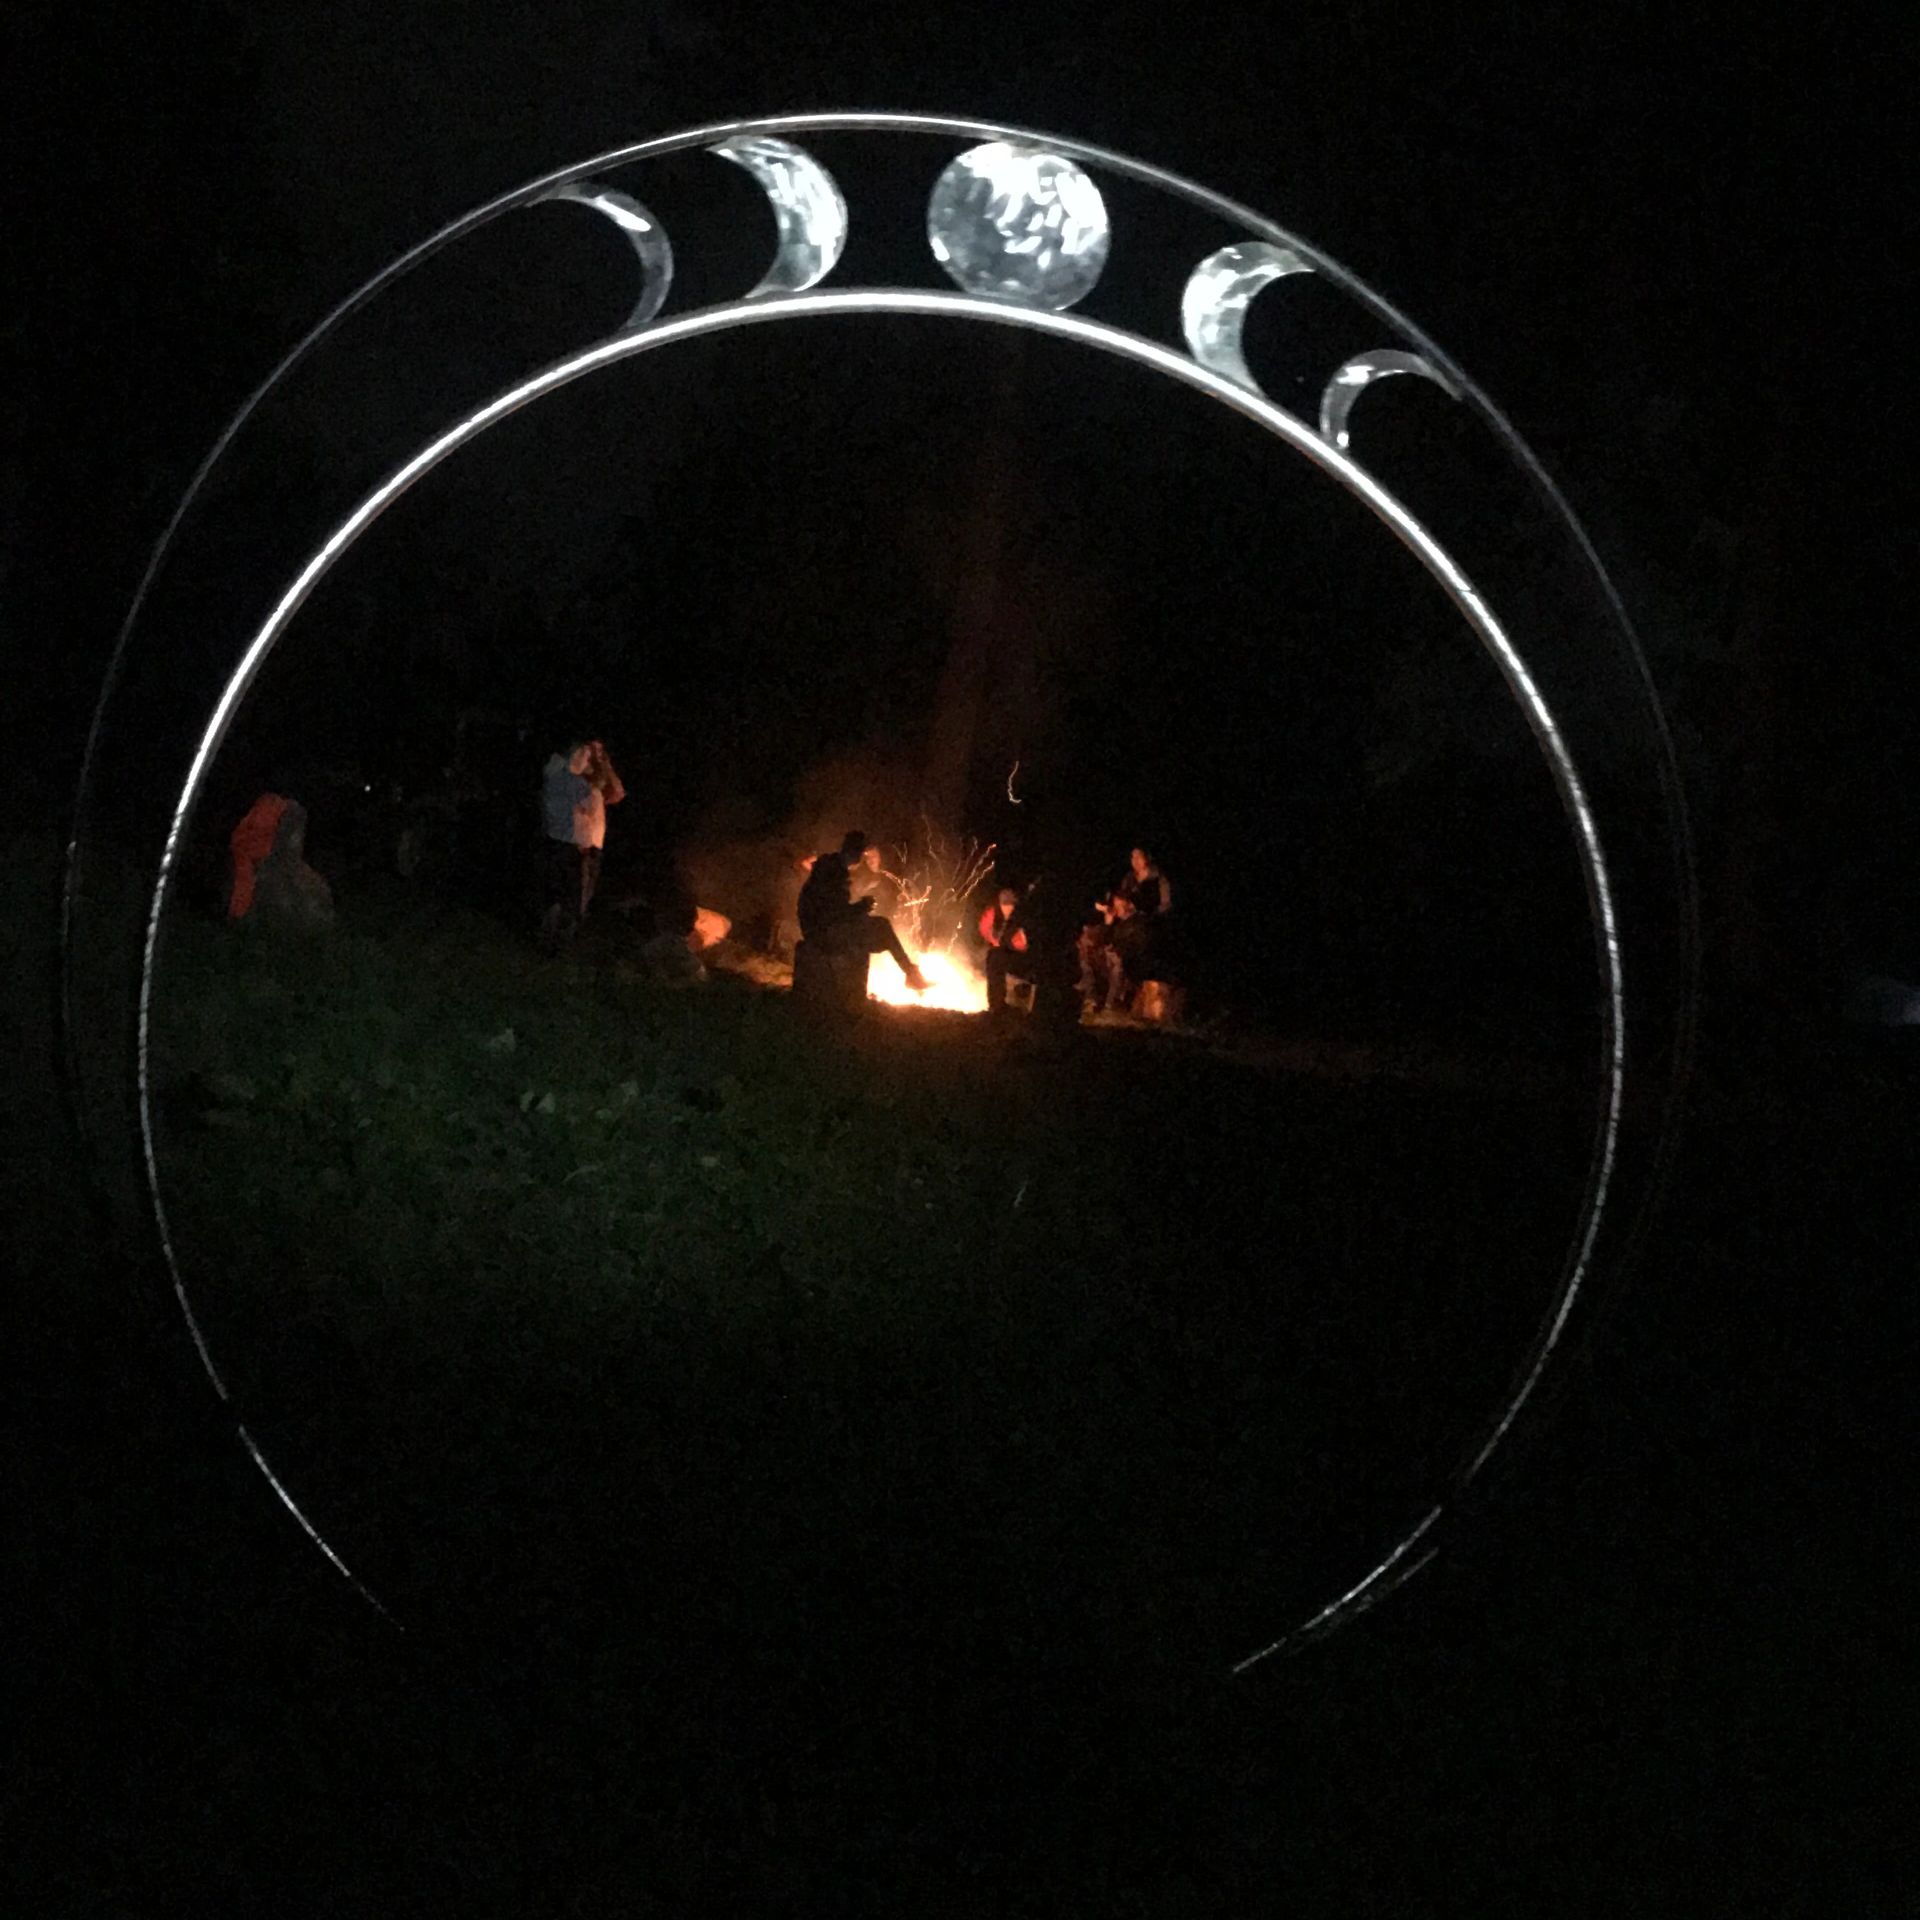 A beautiful welded steel circular portal serves as a gateway to our event venue at Misty Clover Farm